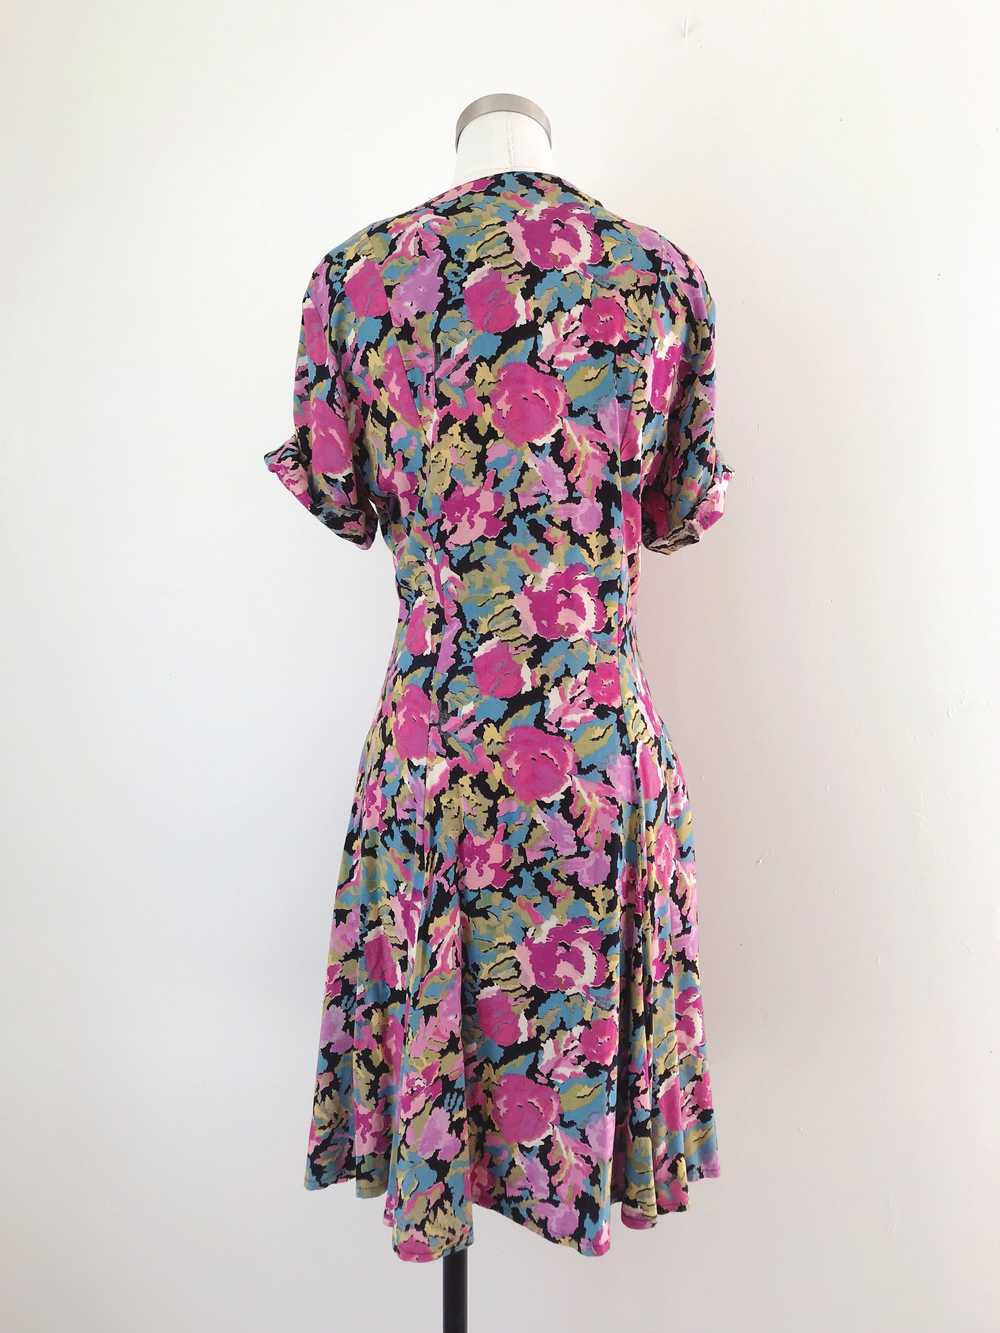 1990s Saturated Floral Minidress - image 6